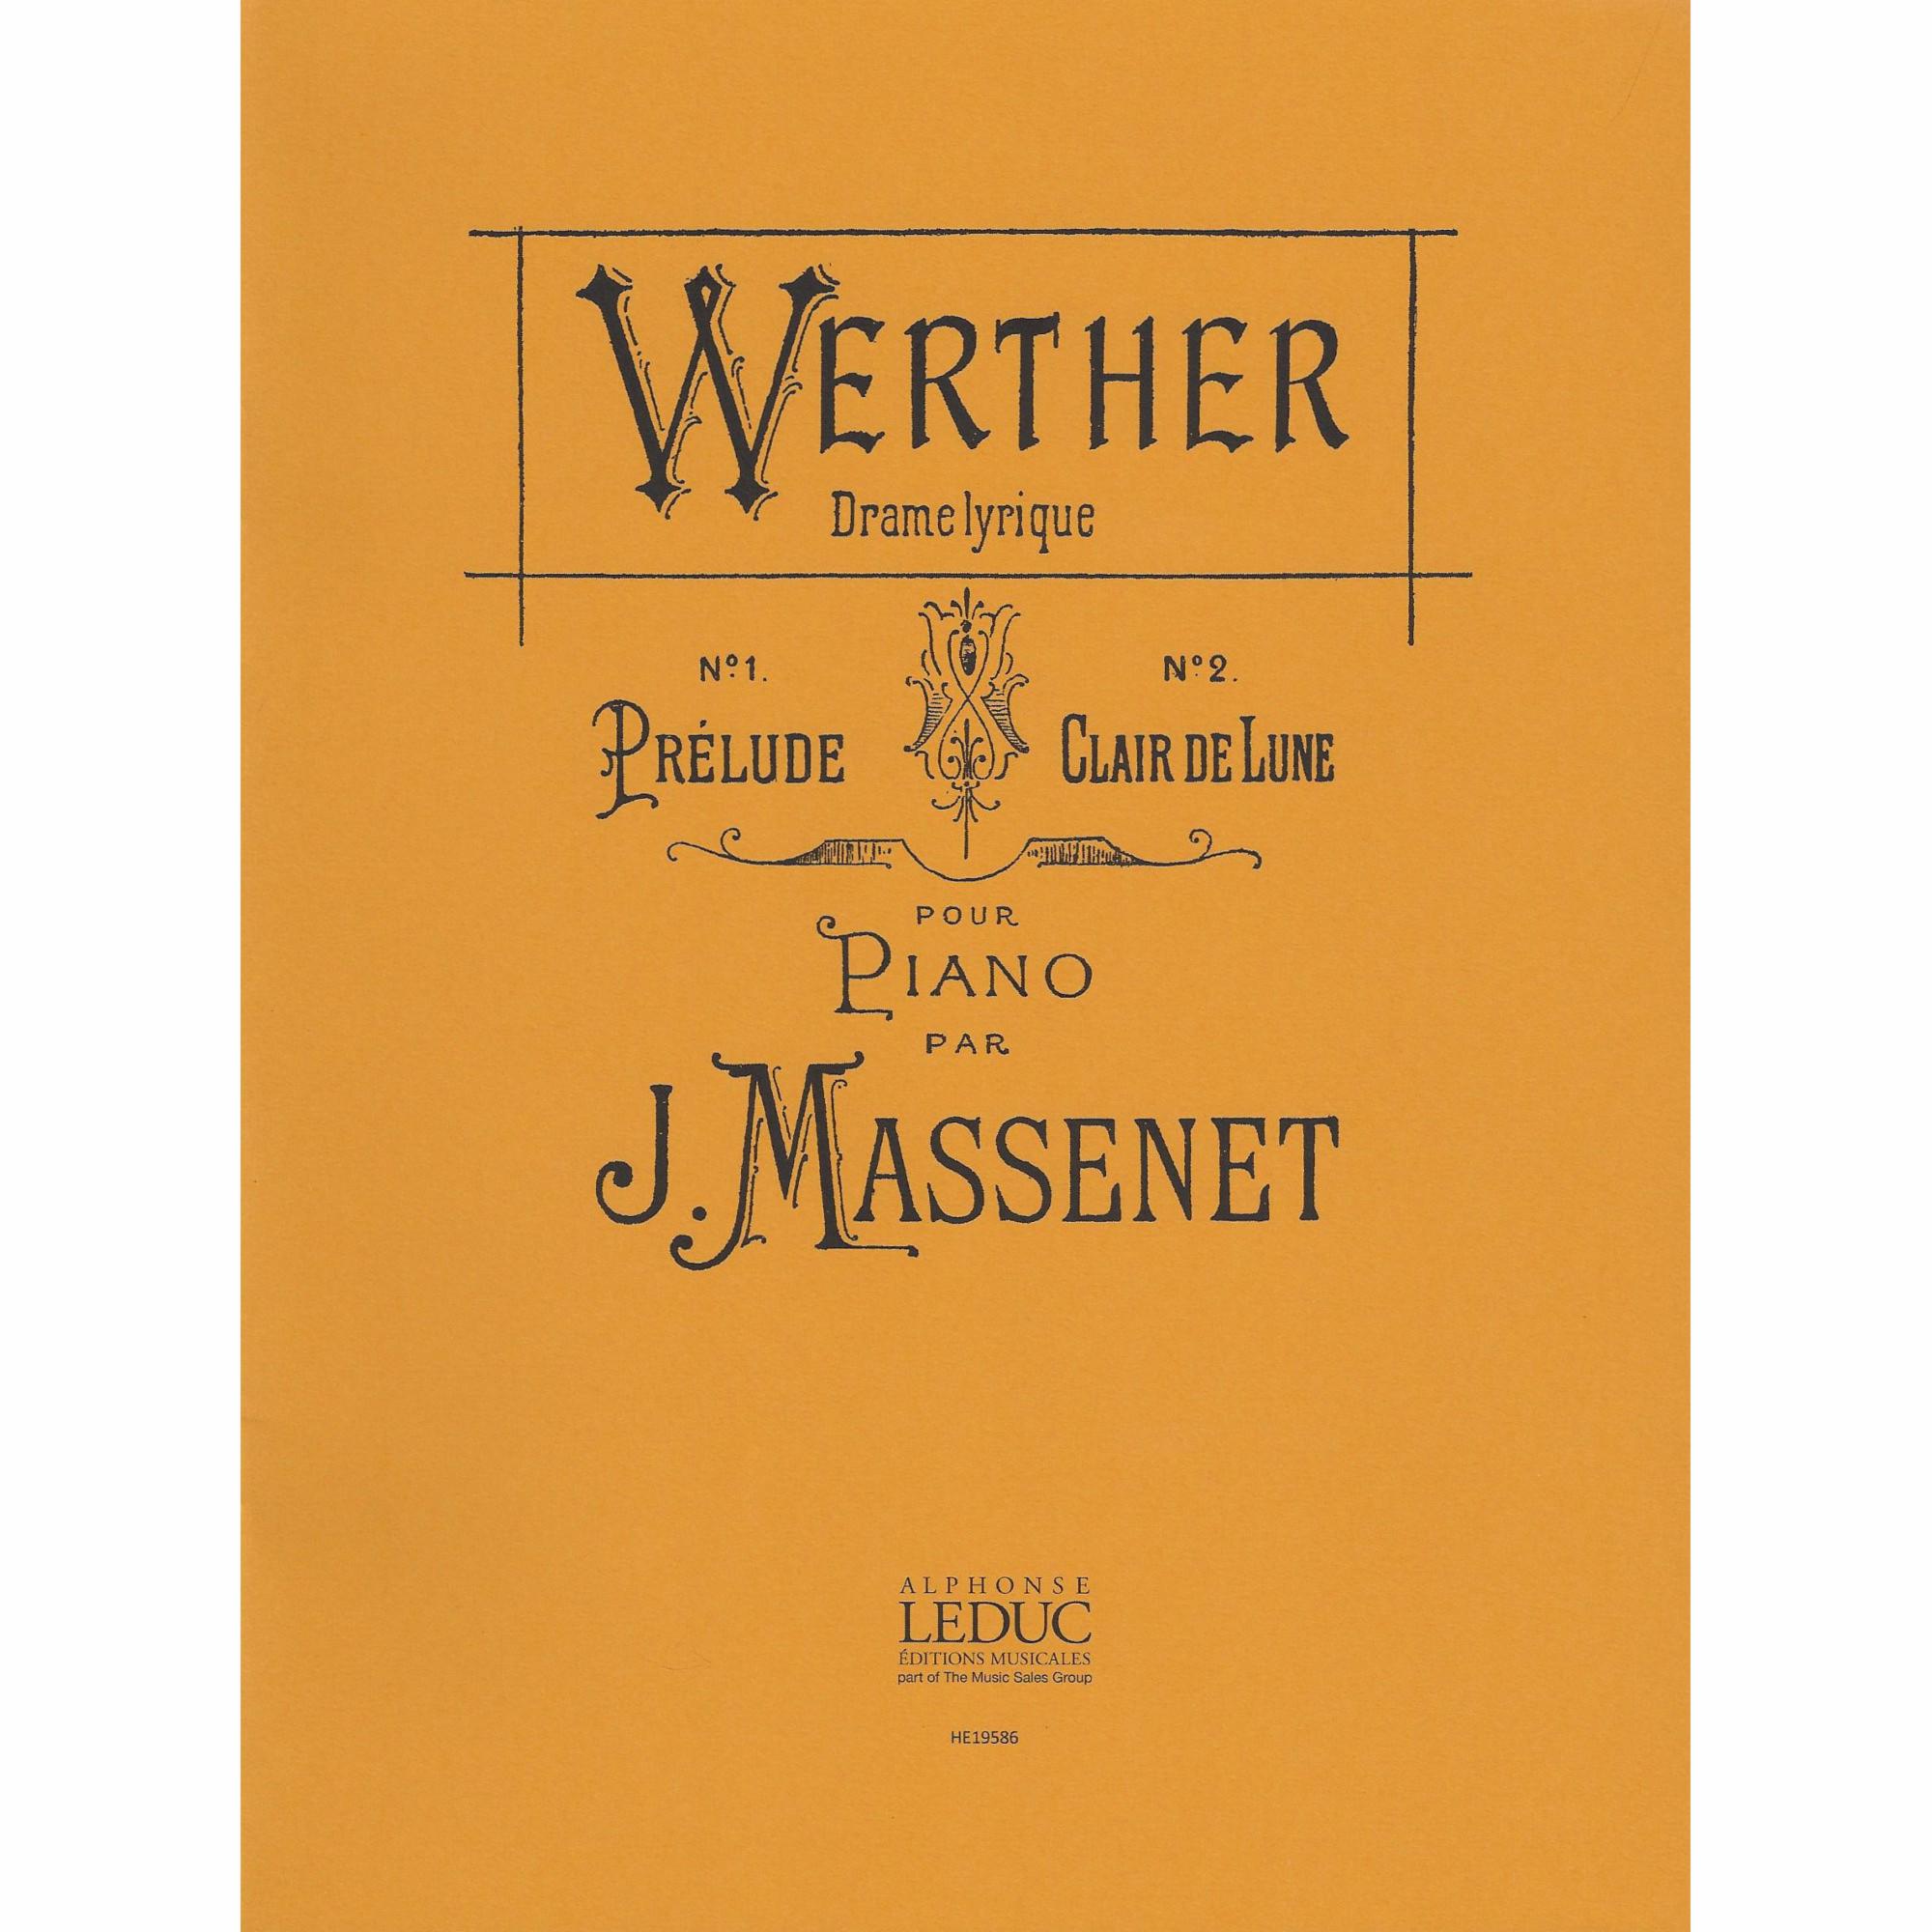 Massenet -- Claire de lune, from Werther for Violin and Piano